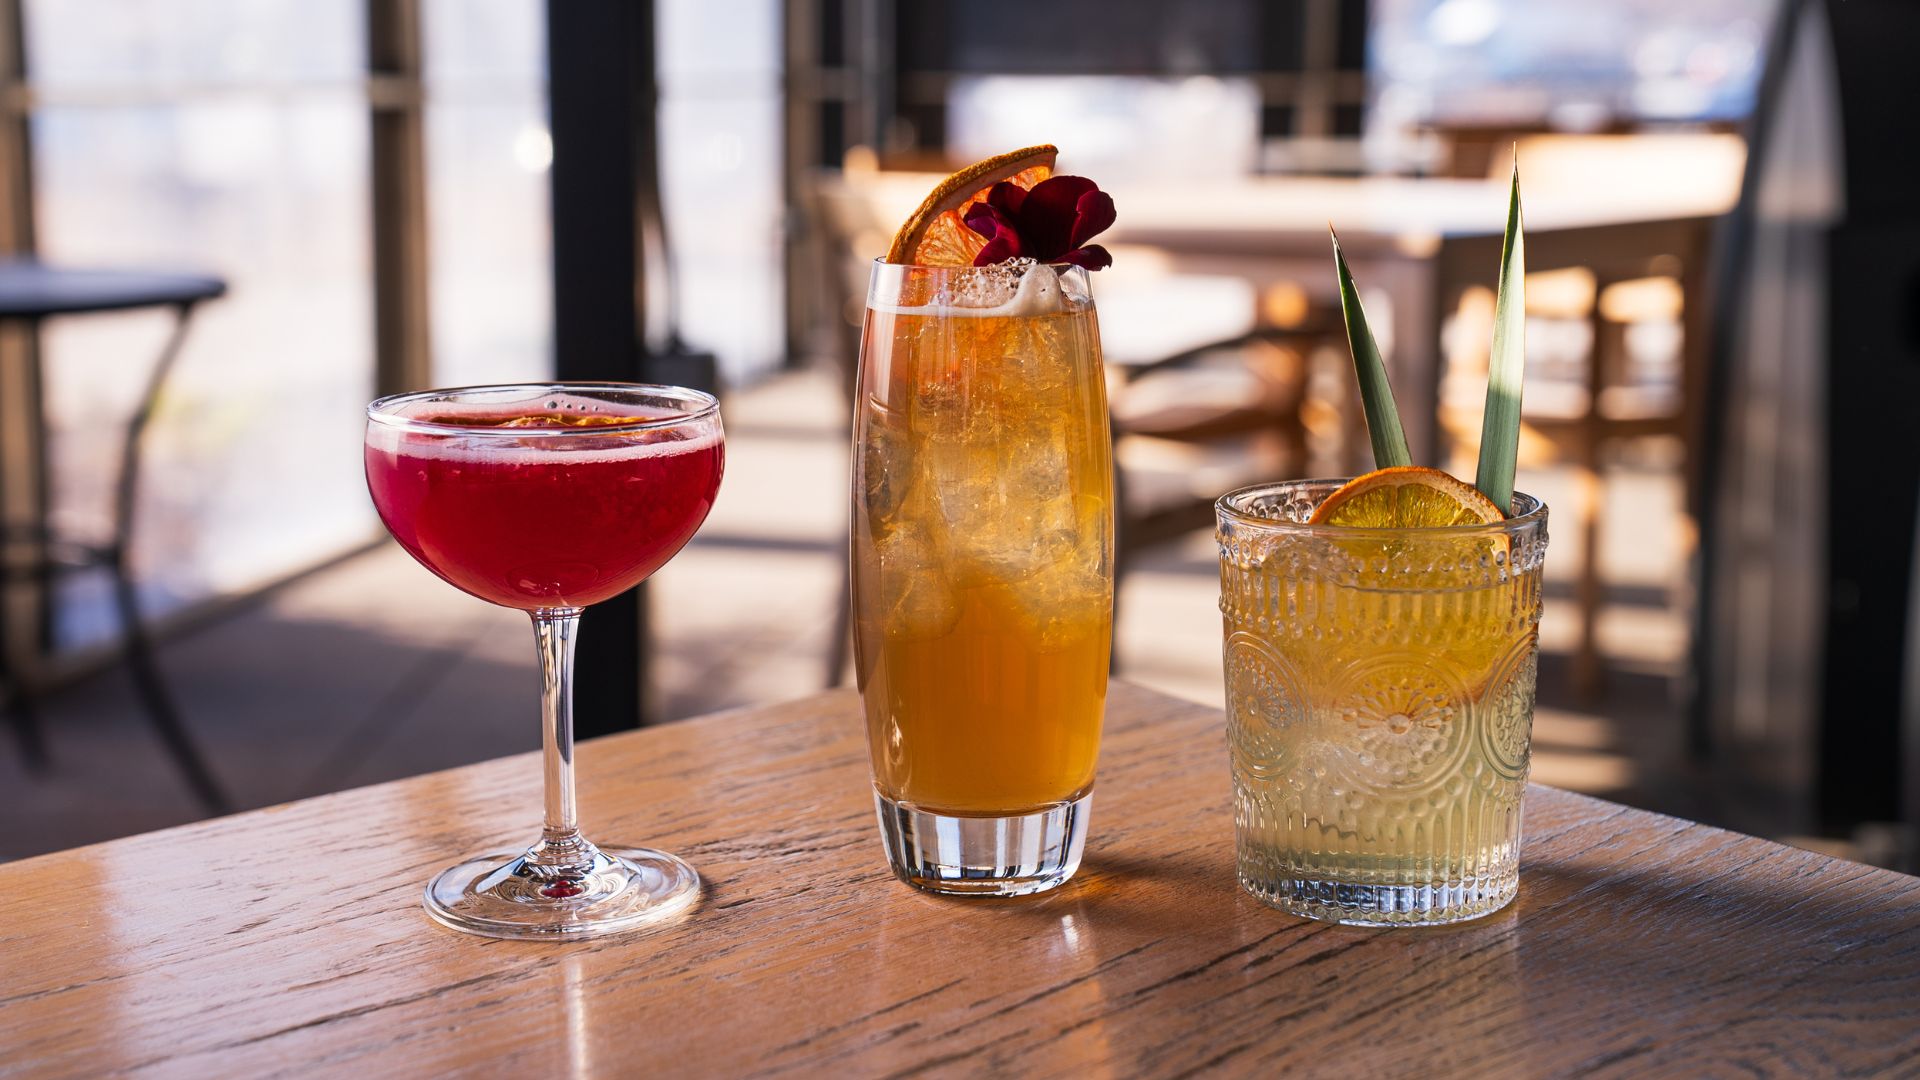 The cocktails at Vicia are inspired by locally grown produce and zero-waste practices.